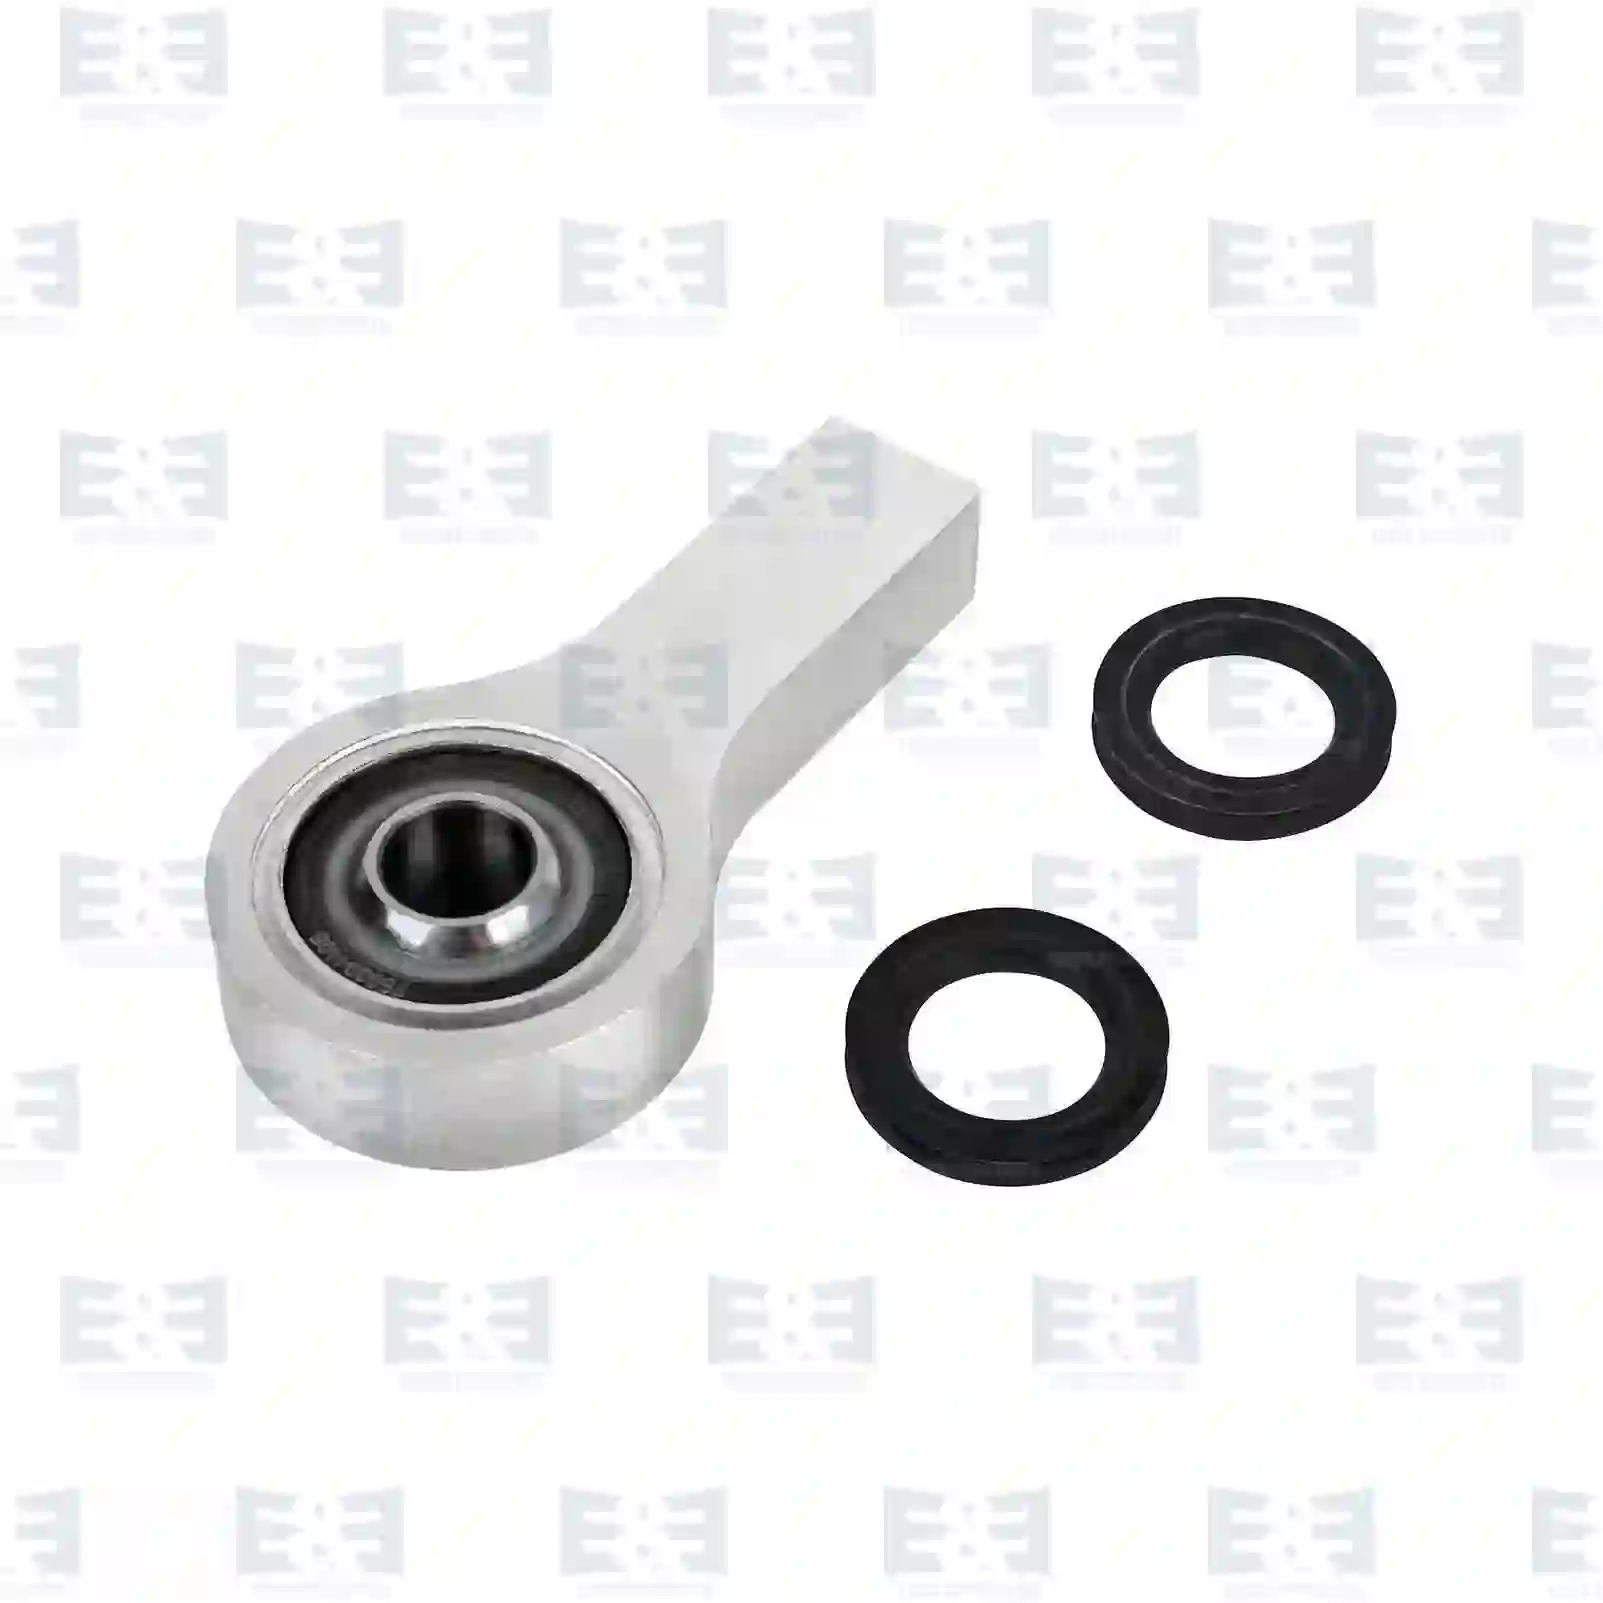 Bearing joint, complete with seal rings, 2E2274909, 2171714, ZG40857-0008, , ||  2E2274909 E&E Truck Spare Parts | Truck Spare Parts, Auotomotive Spare Parts Bearing joint, complete with seal rings, 2E2274909, 2171714, ZG40857-0008, , ||  2E2274909 E&E Truck Spare Parts | Truck Spare Parts, Auotomotive Spare Parts